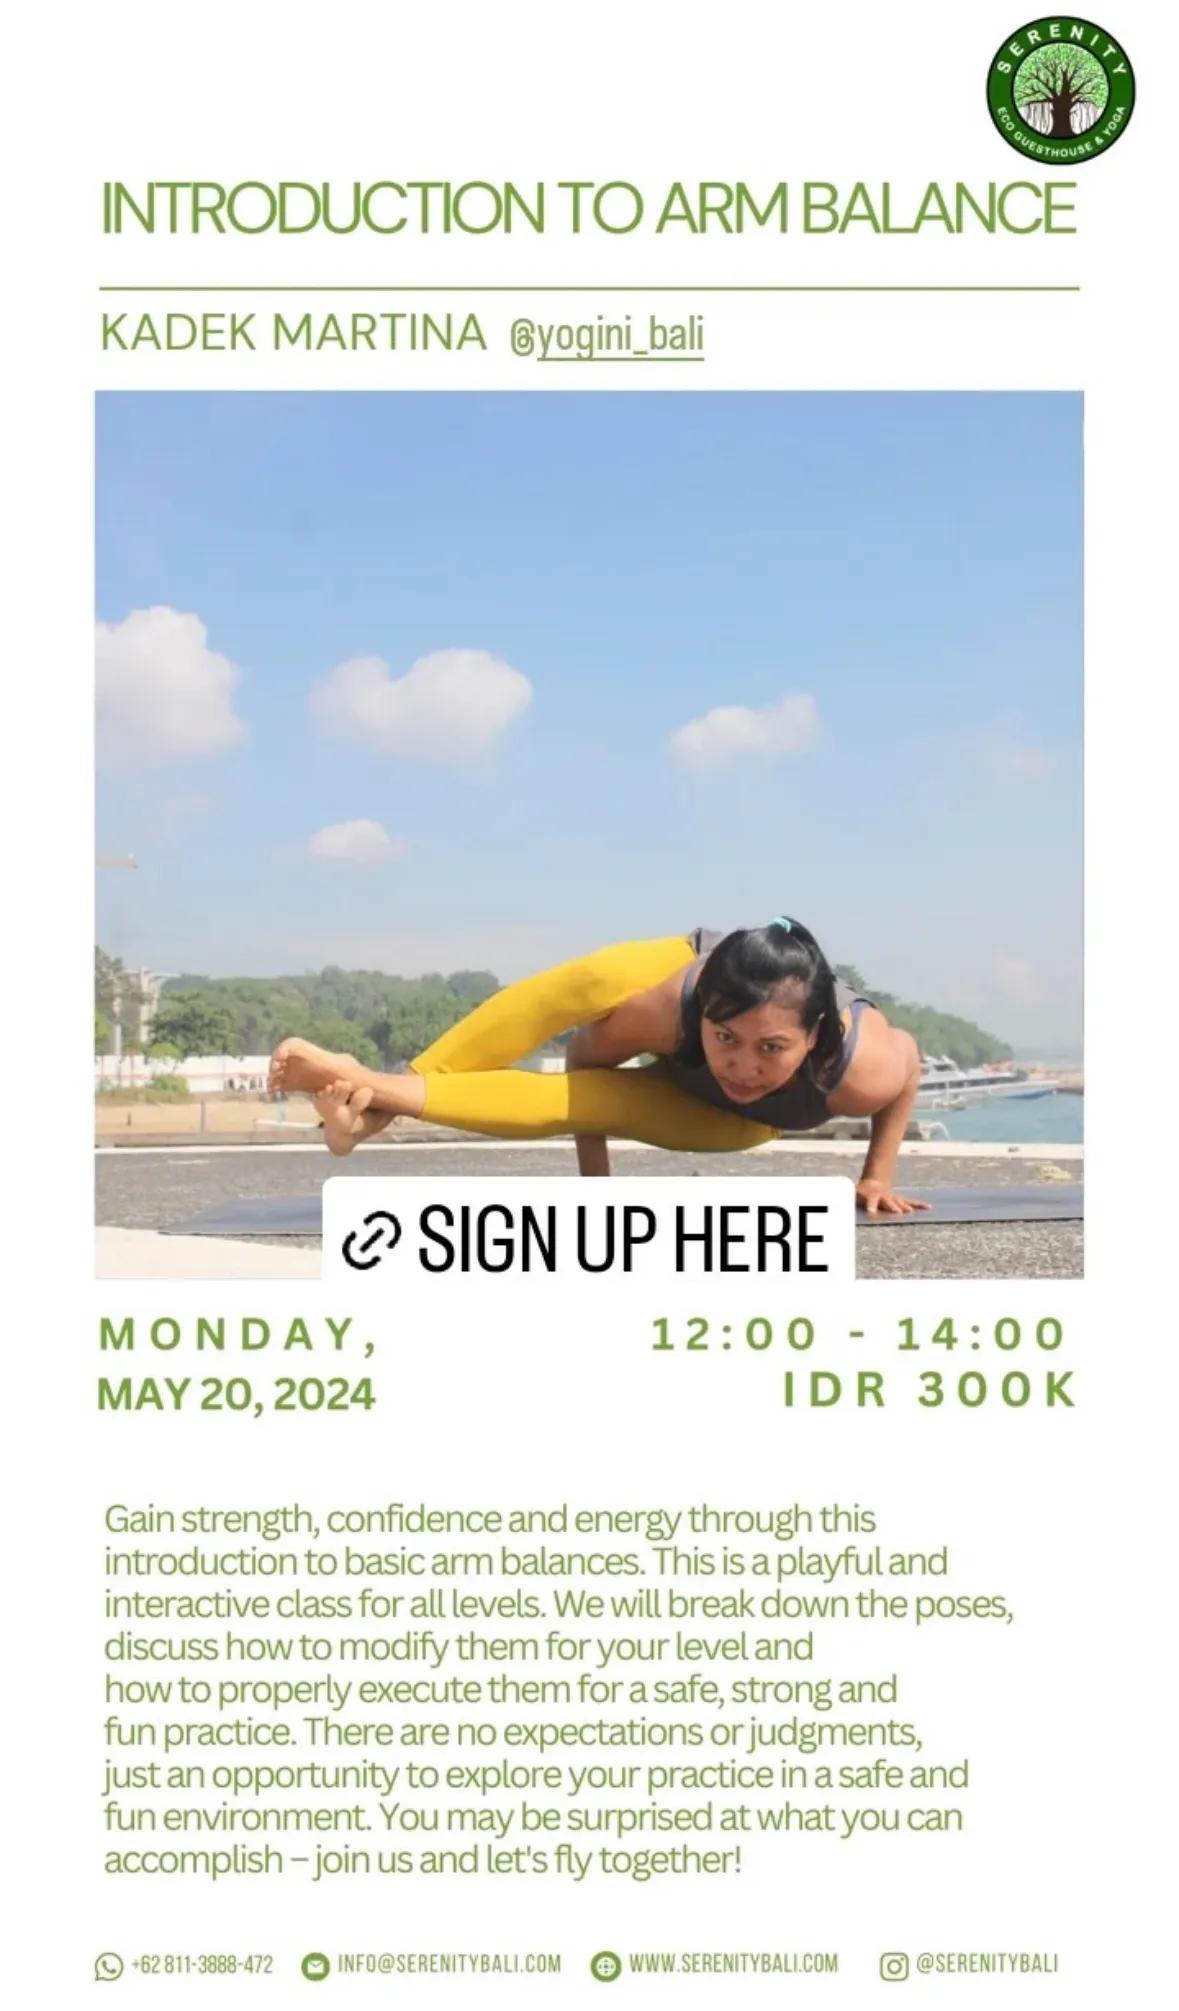 Event at Serenity Eco Guesthouse and Yoga on May 20 2024: Introduction to Arm Balance